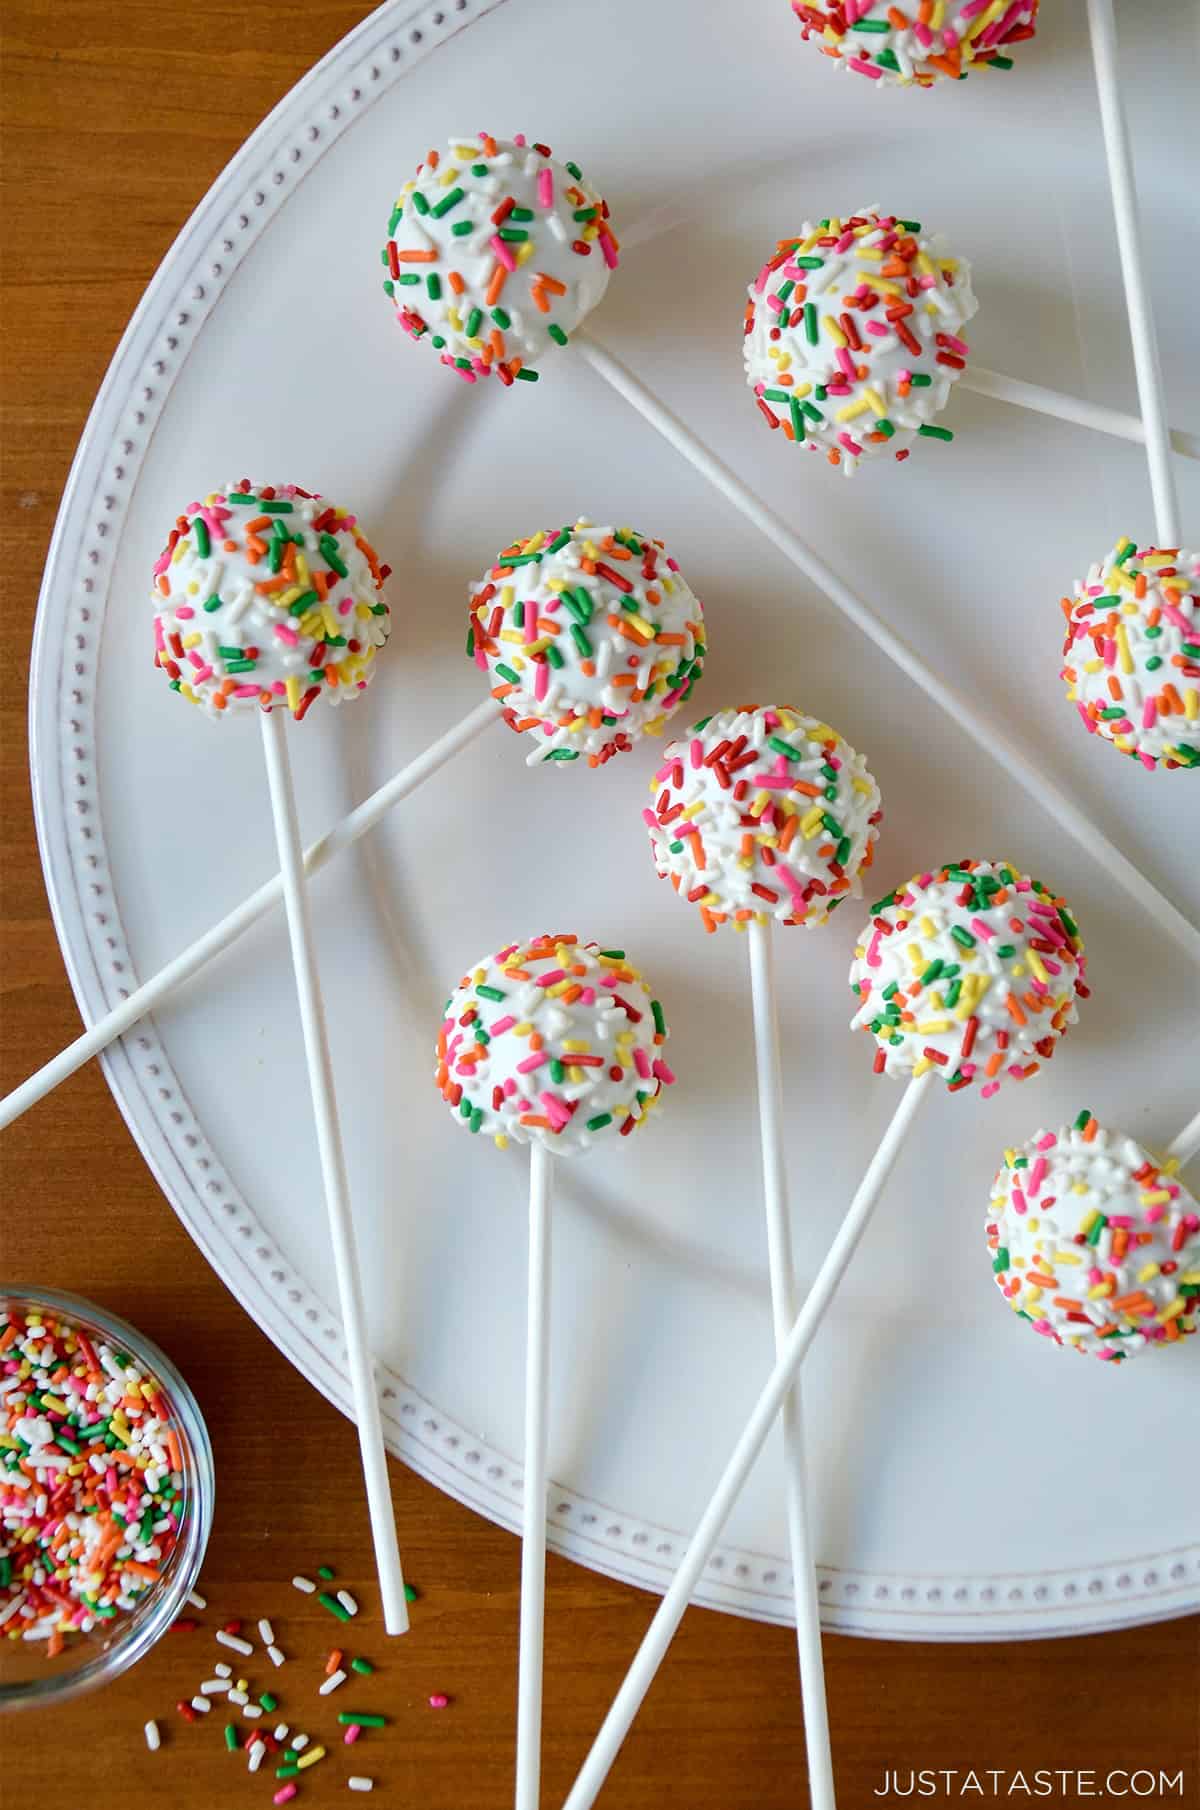 Cheesecake cookie pops coated in white chocolate and covered in rainbow sprinkles on a large white plate. A small bowl with more rainbow sprinkles is to the bottom left of the plate.